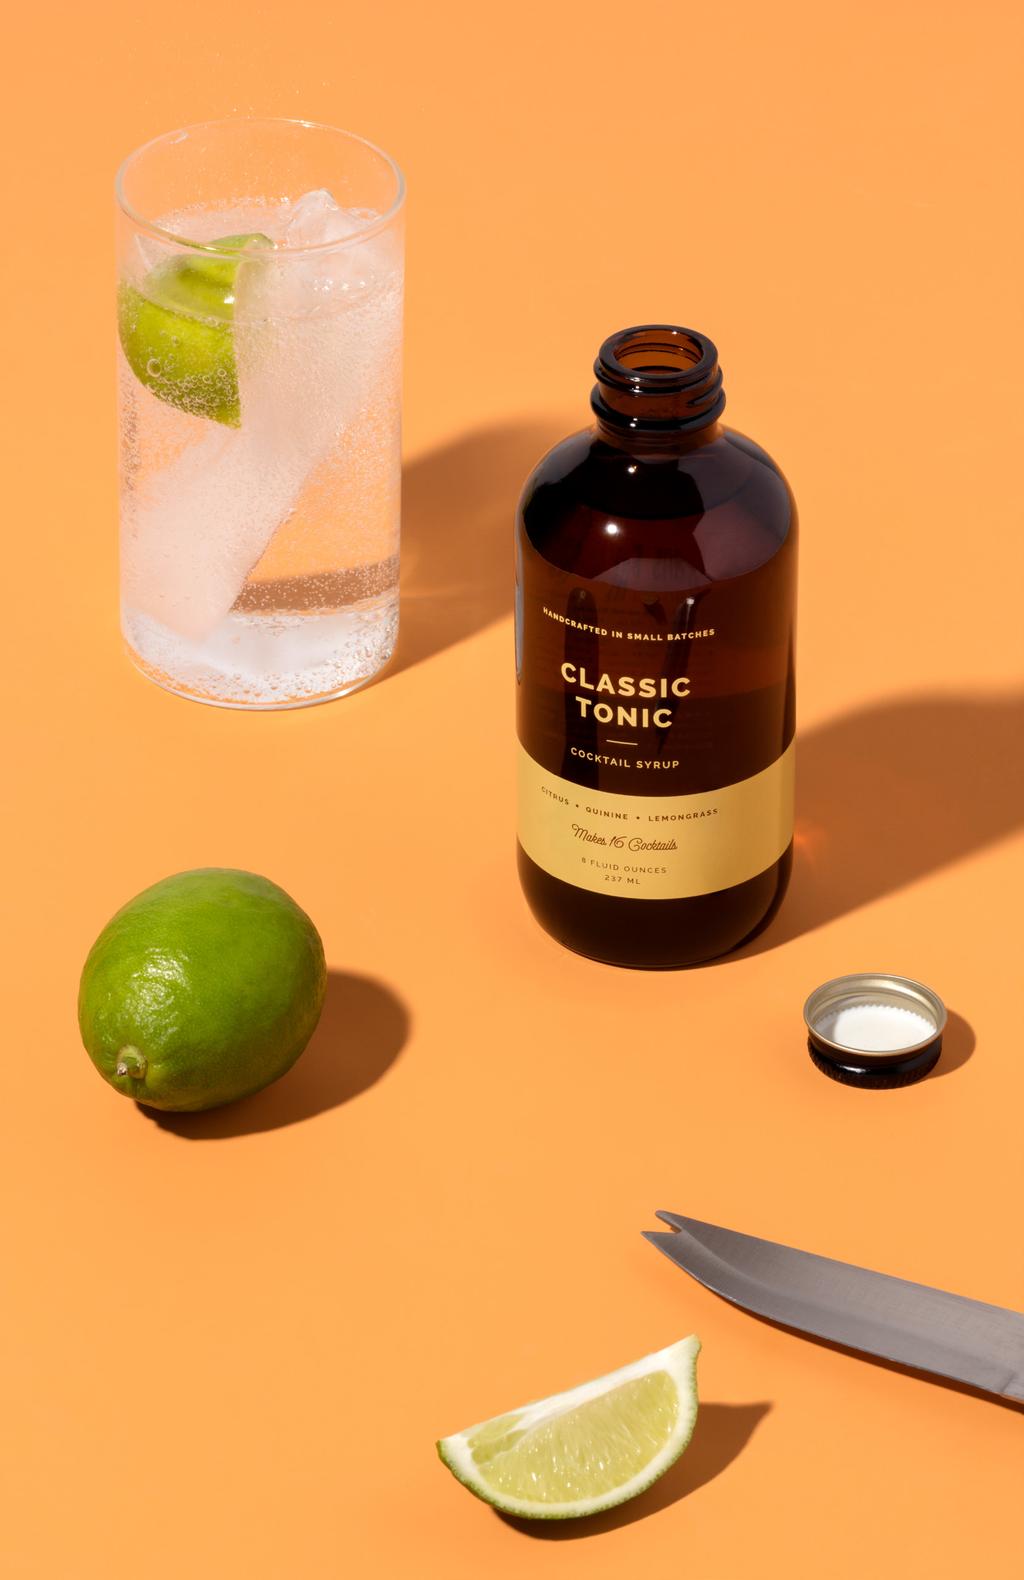 CLASSIC TONIC SYRUP Carefully crafted from cane sugar, citrus and botanicals, this